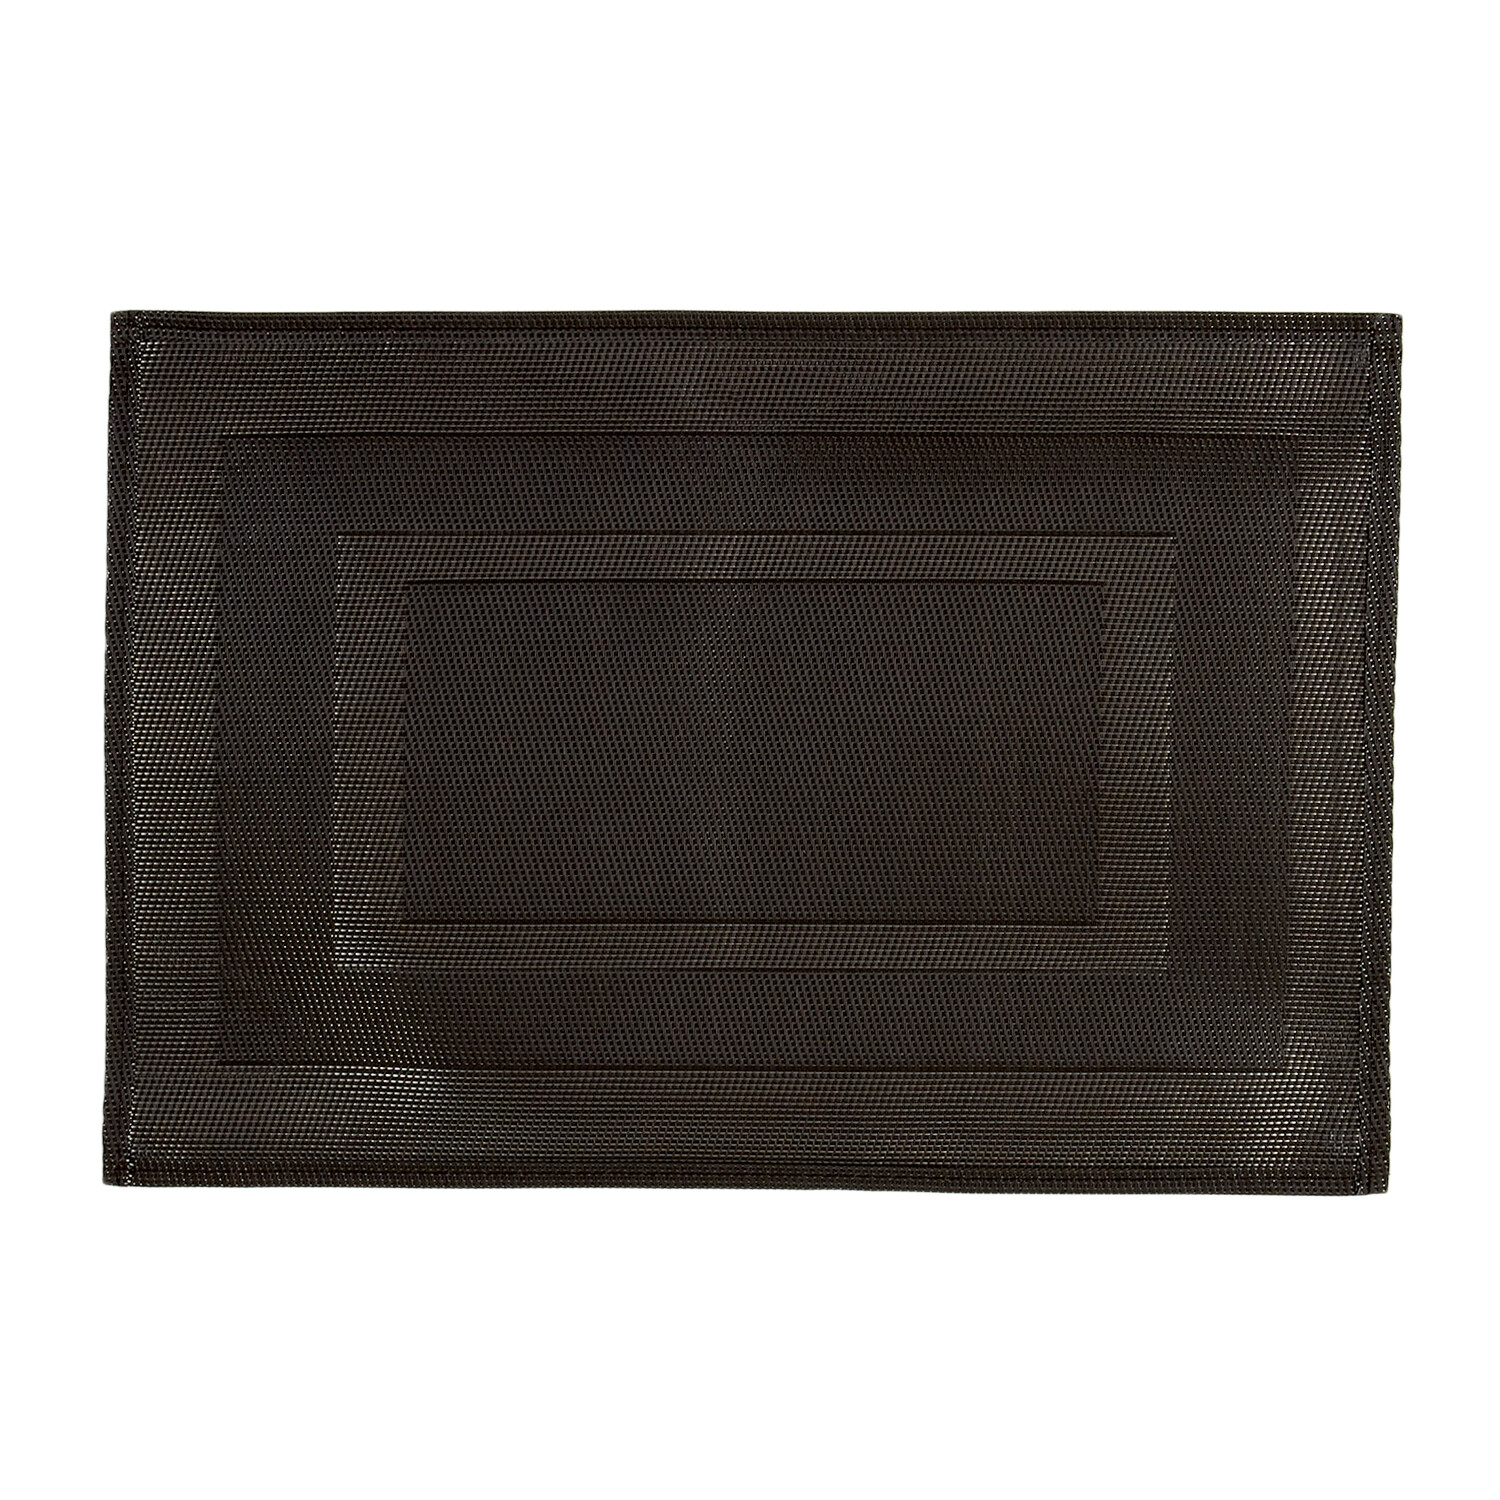 Woven Placemat - Dark Brown Image